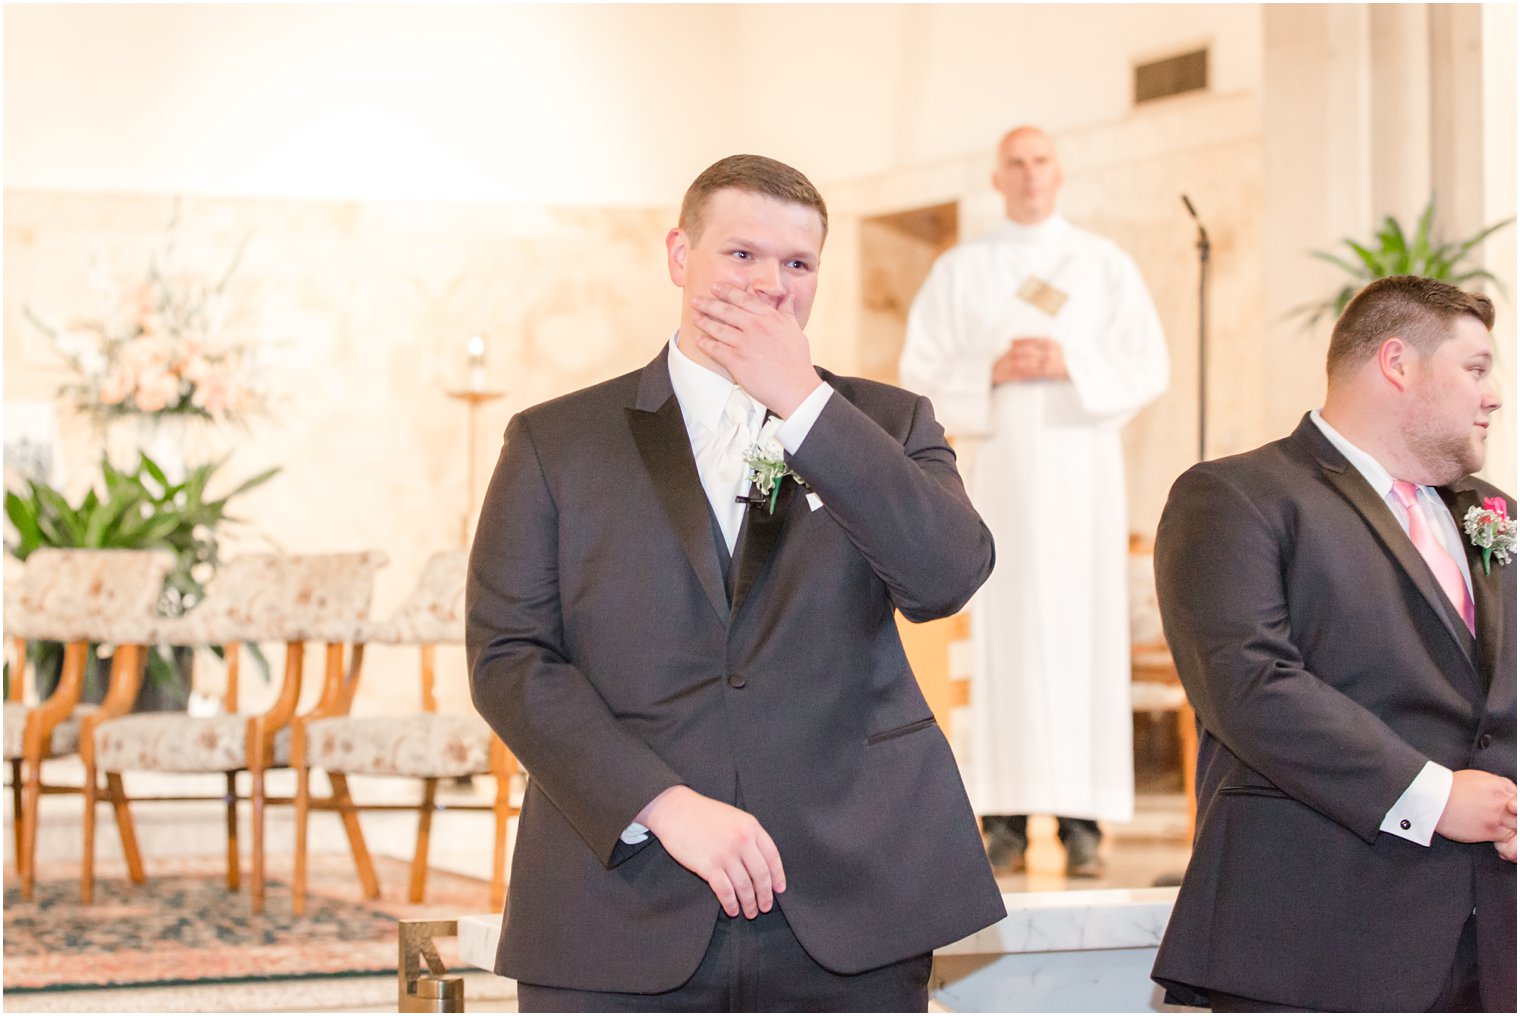 groom's reaction at seeing bride walking down the aisle